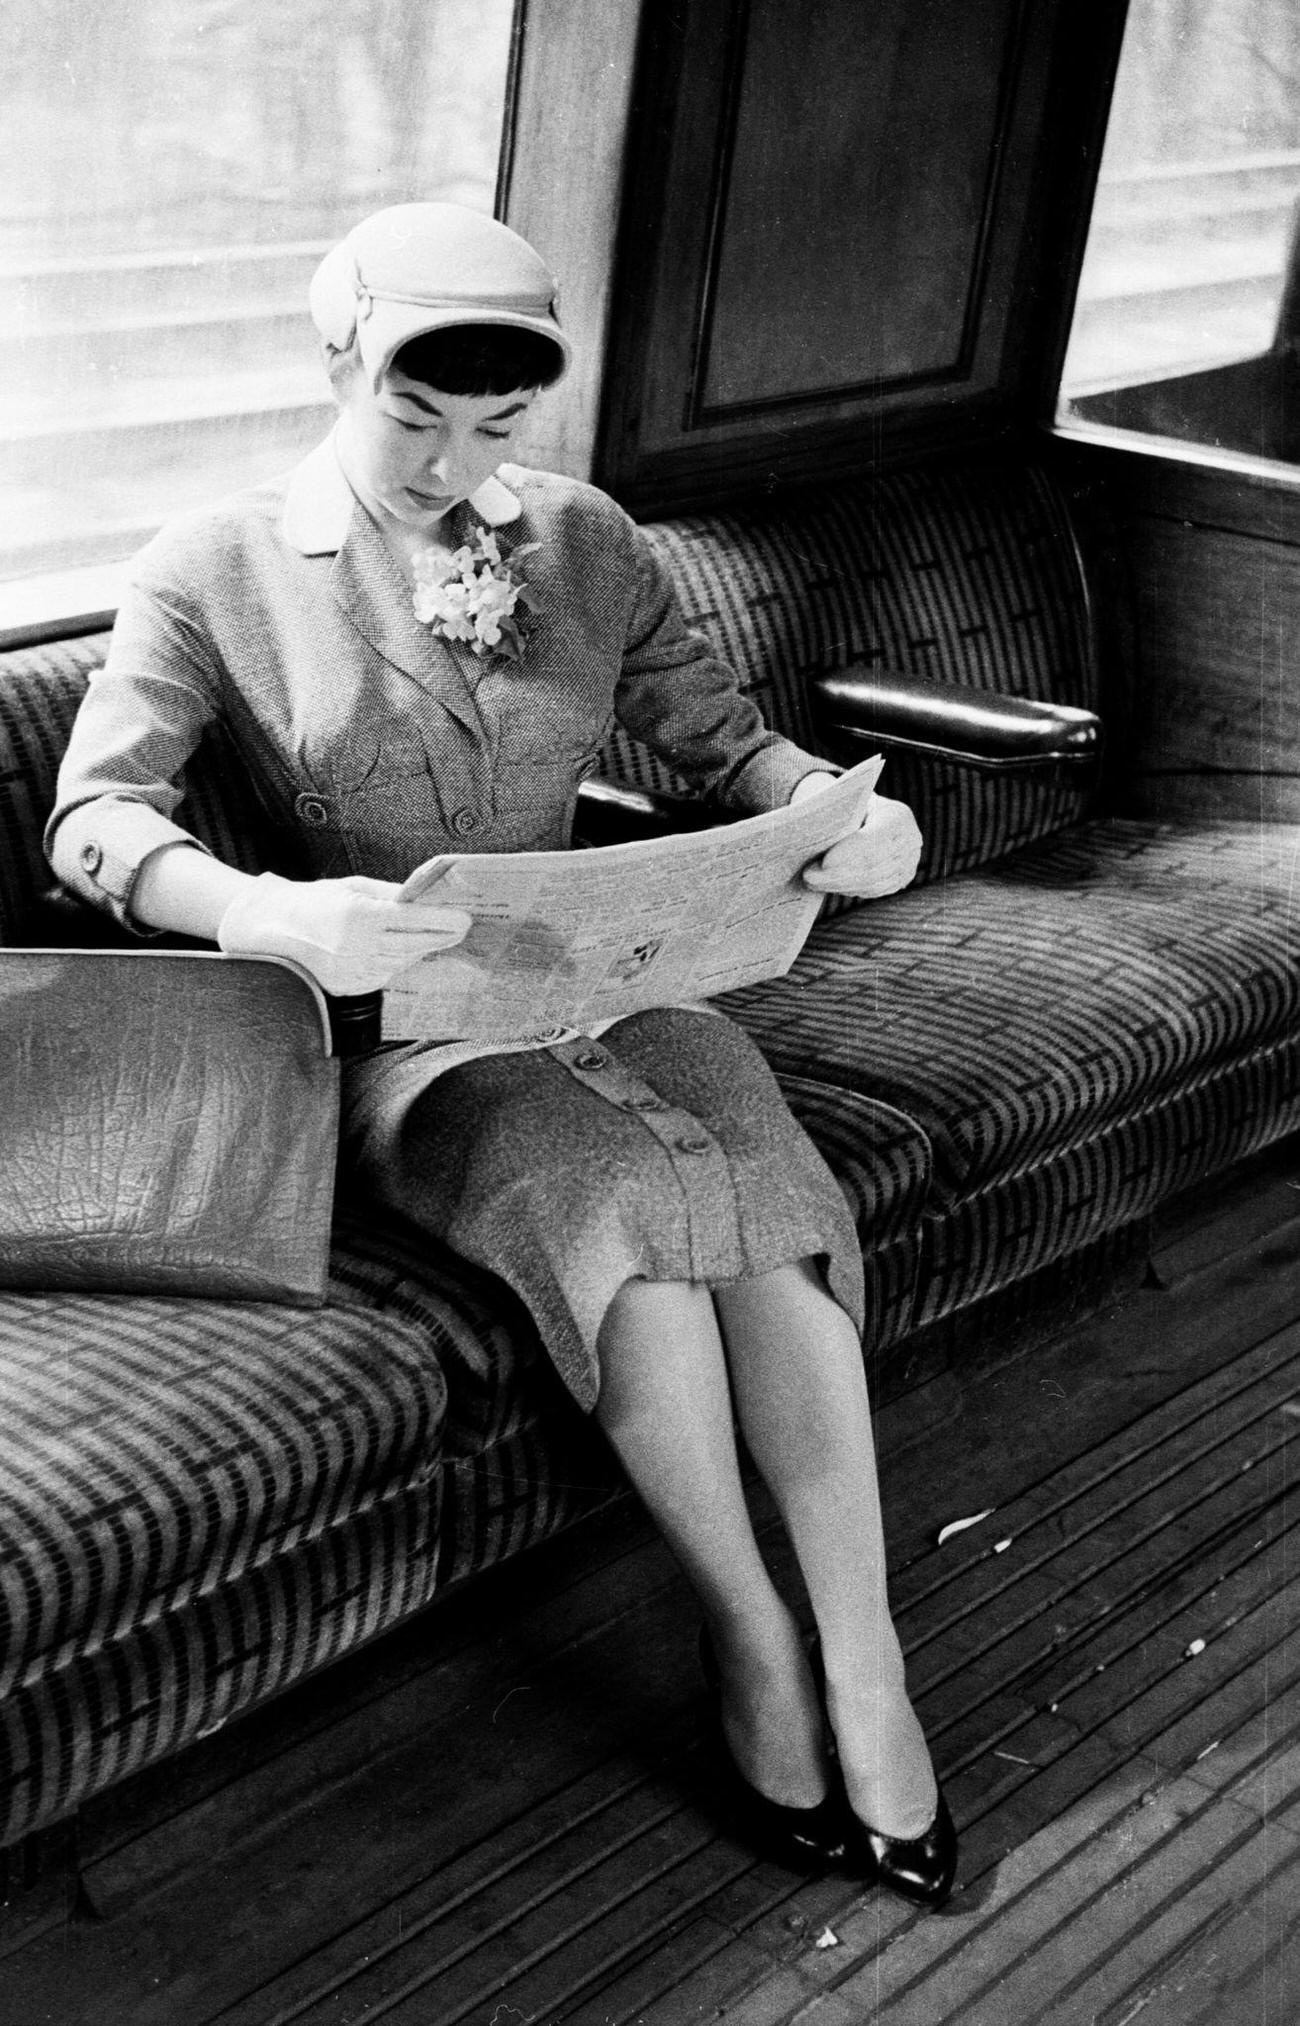 A woman wearing a grey tweed suit and reading a newspaper on the train journey to work, 1954